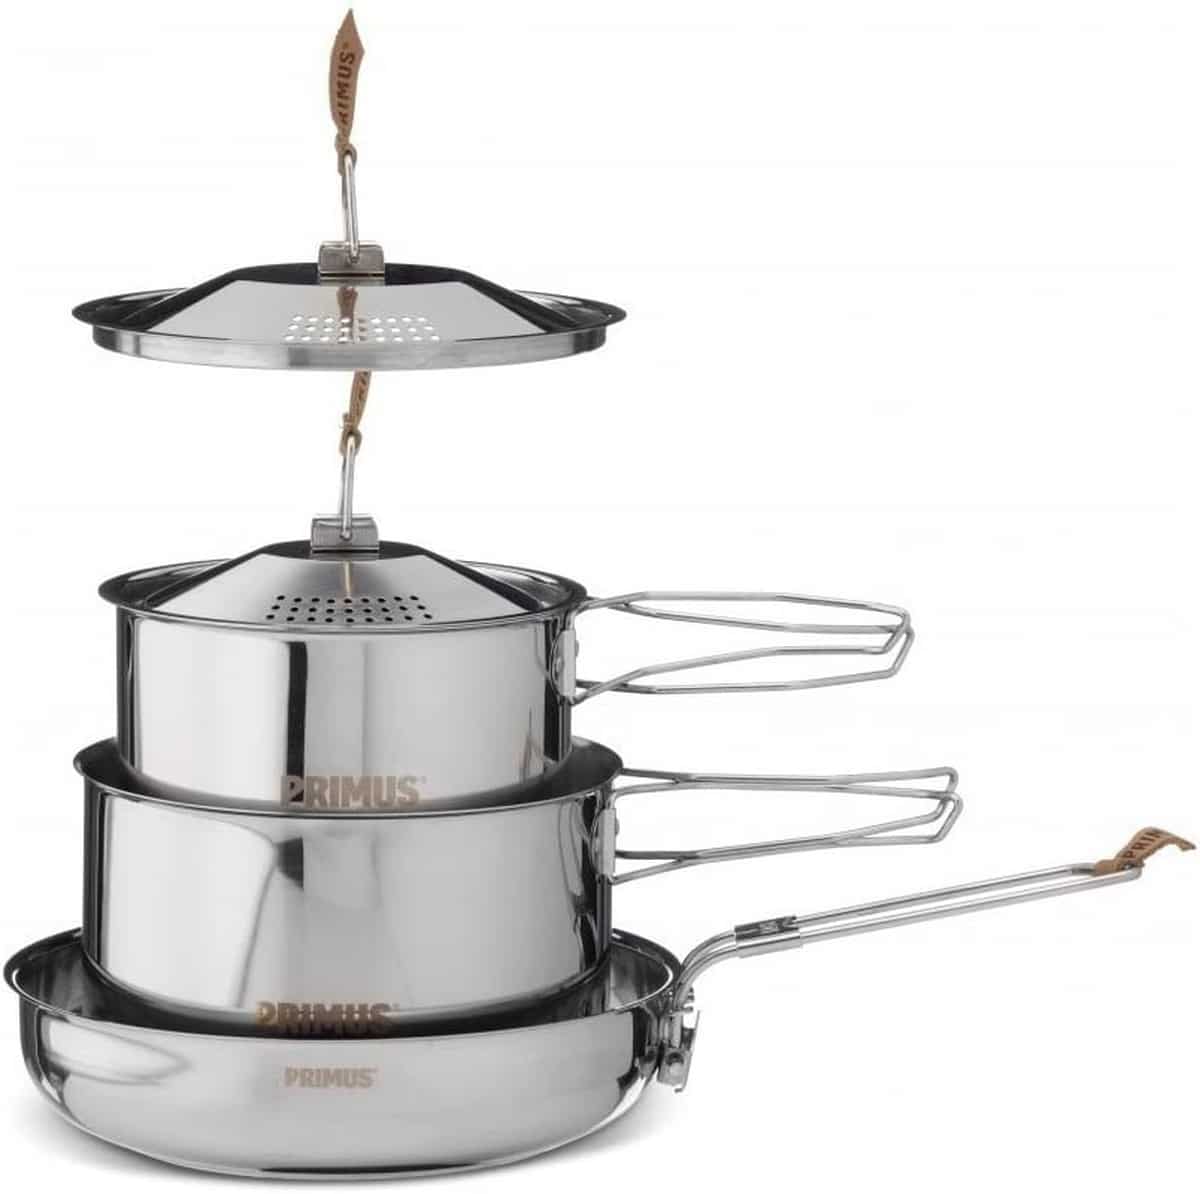 Primus stainless steel campfire cookset